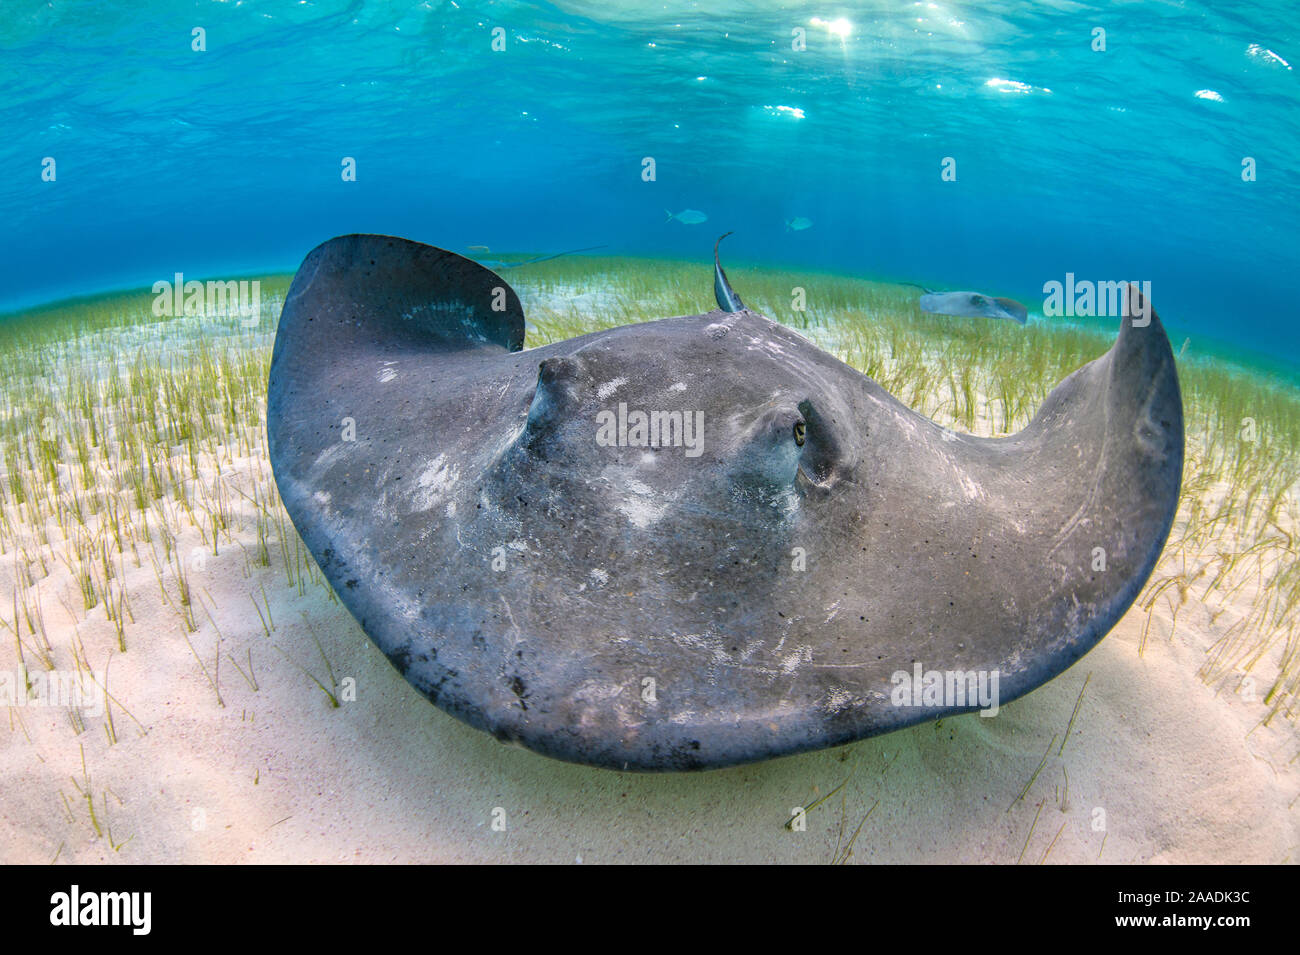 Southern stingray (Dasyatis americana) large female foraging over seagrass in shallow water. The Sandbar, Grand Cayman, Cayman Islands. British West Indies. Caribbean Sea. Stock Photo